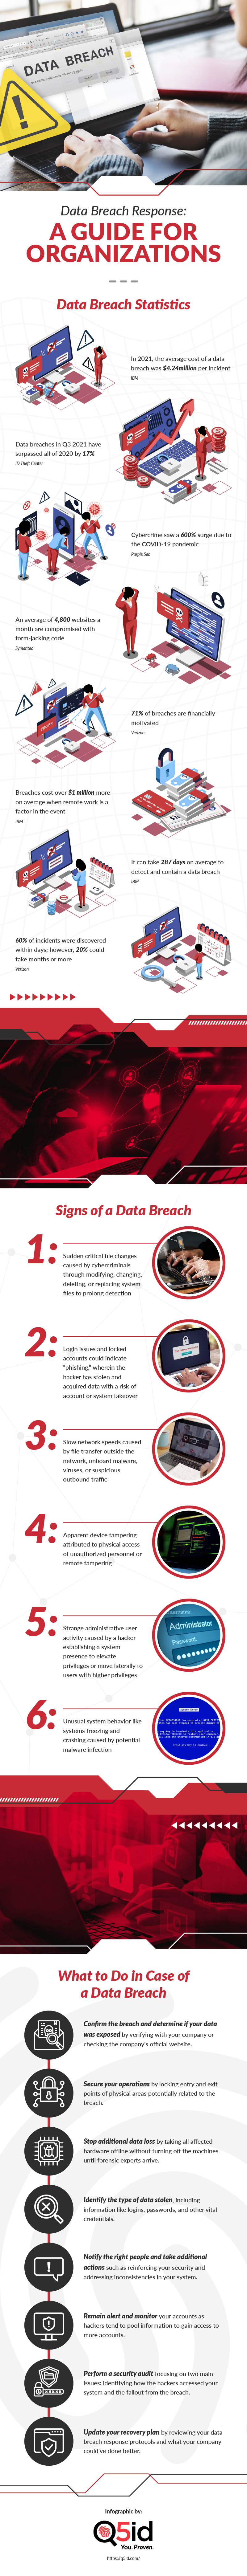 A Guide on Responding to Data Breaches